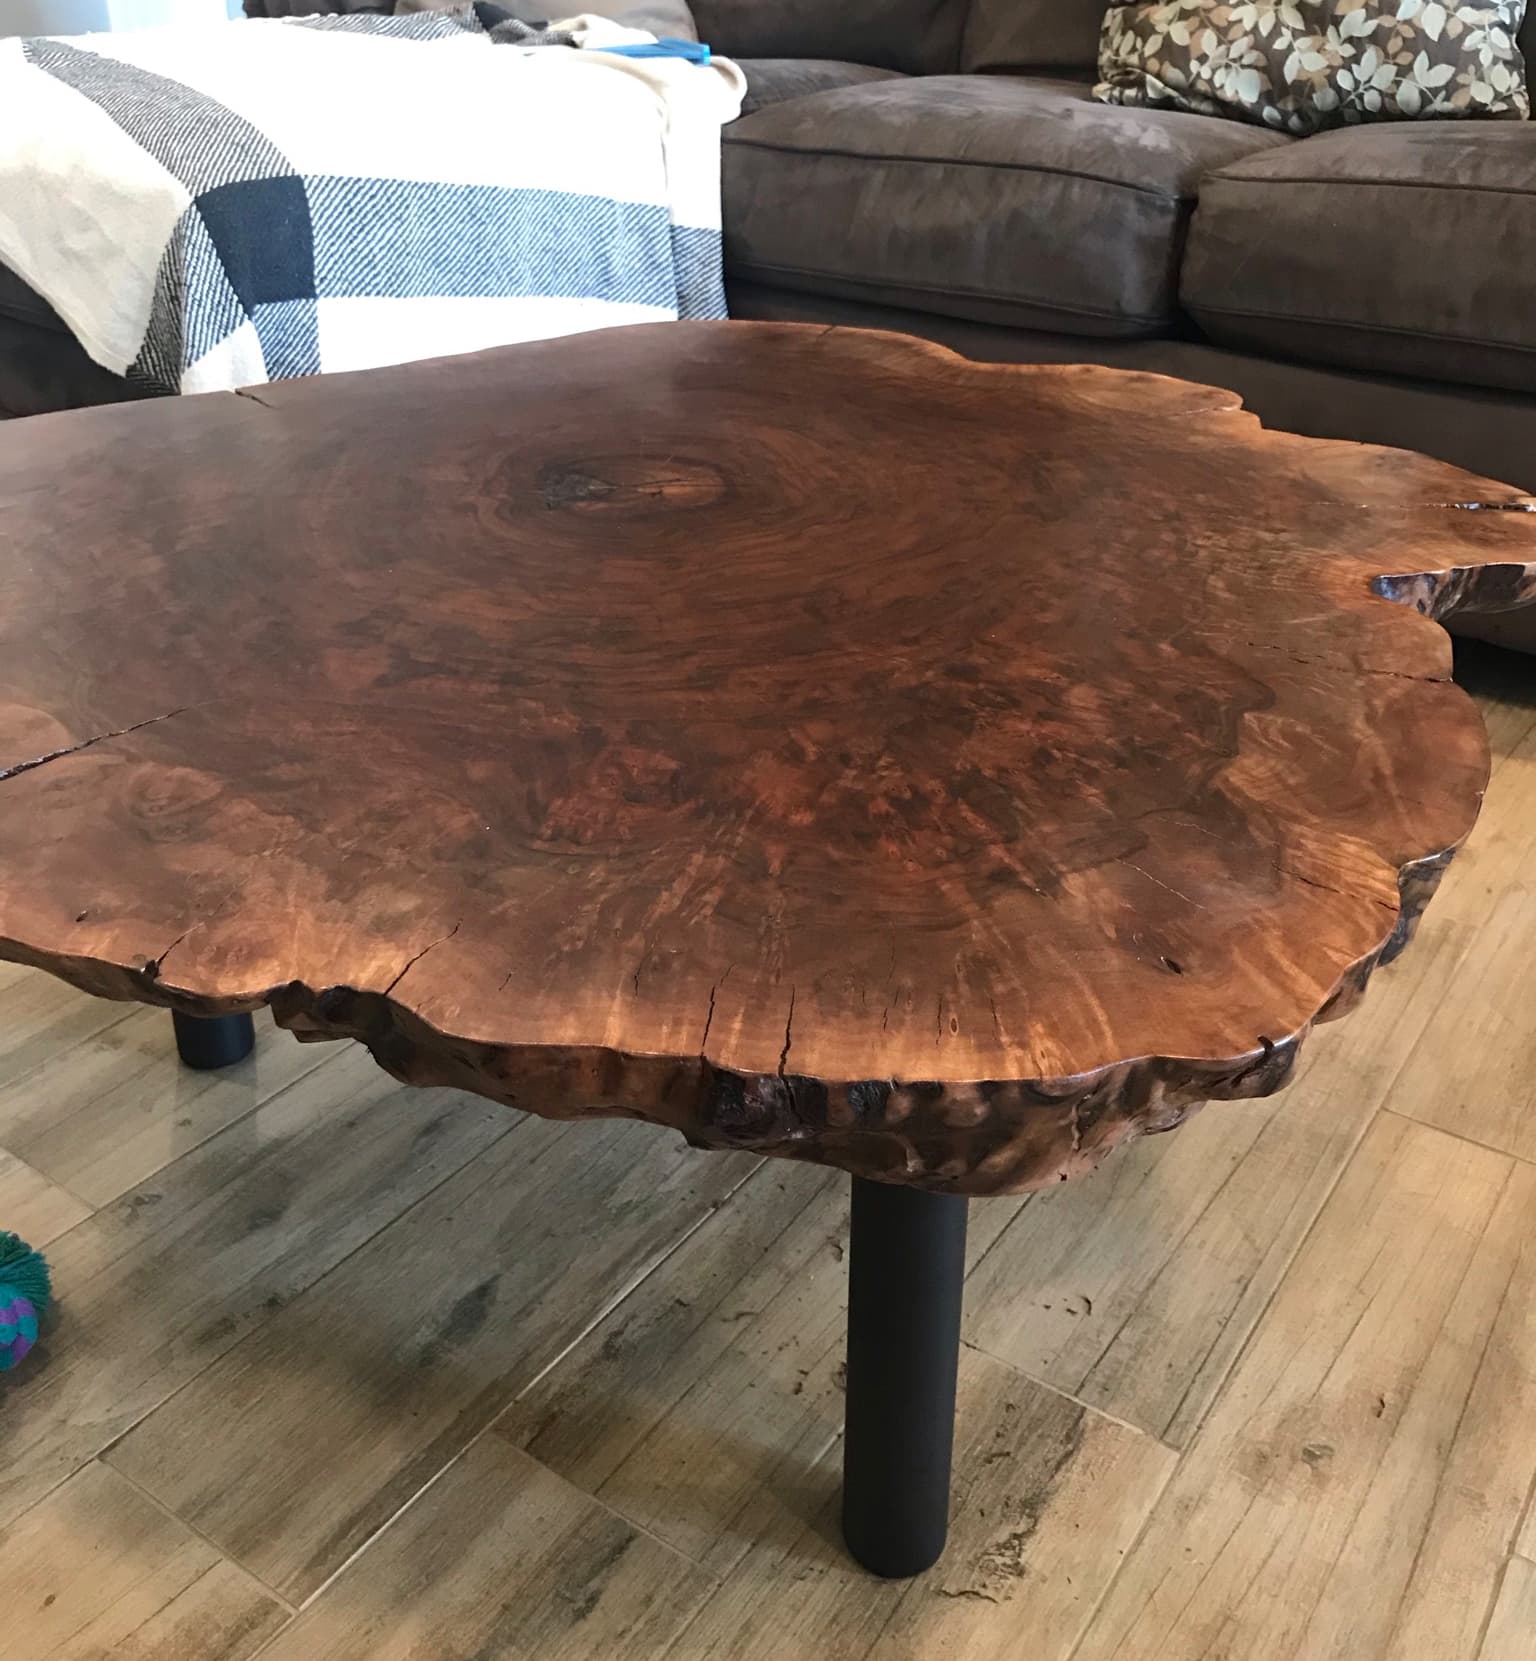 Custom Handmade Coffee Tables That Make a Statement in San Diego, Poway, and Ramona Homes